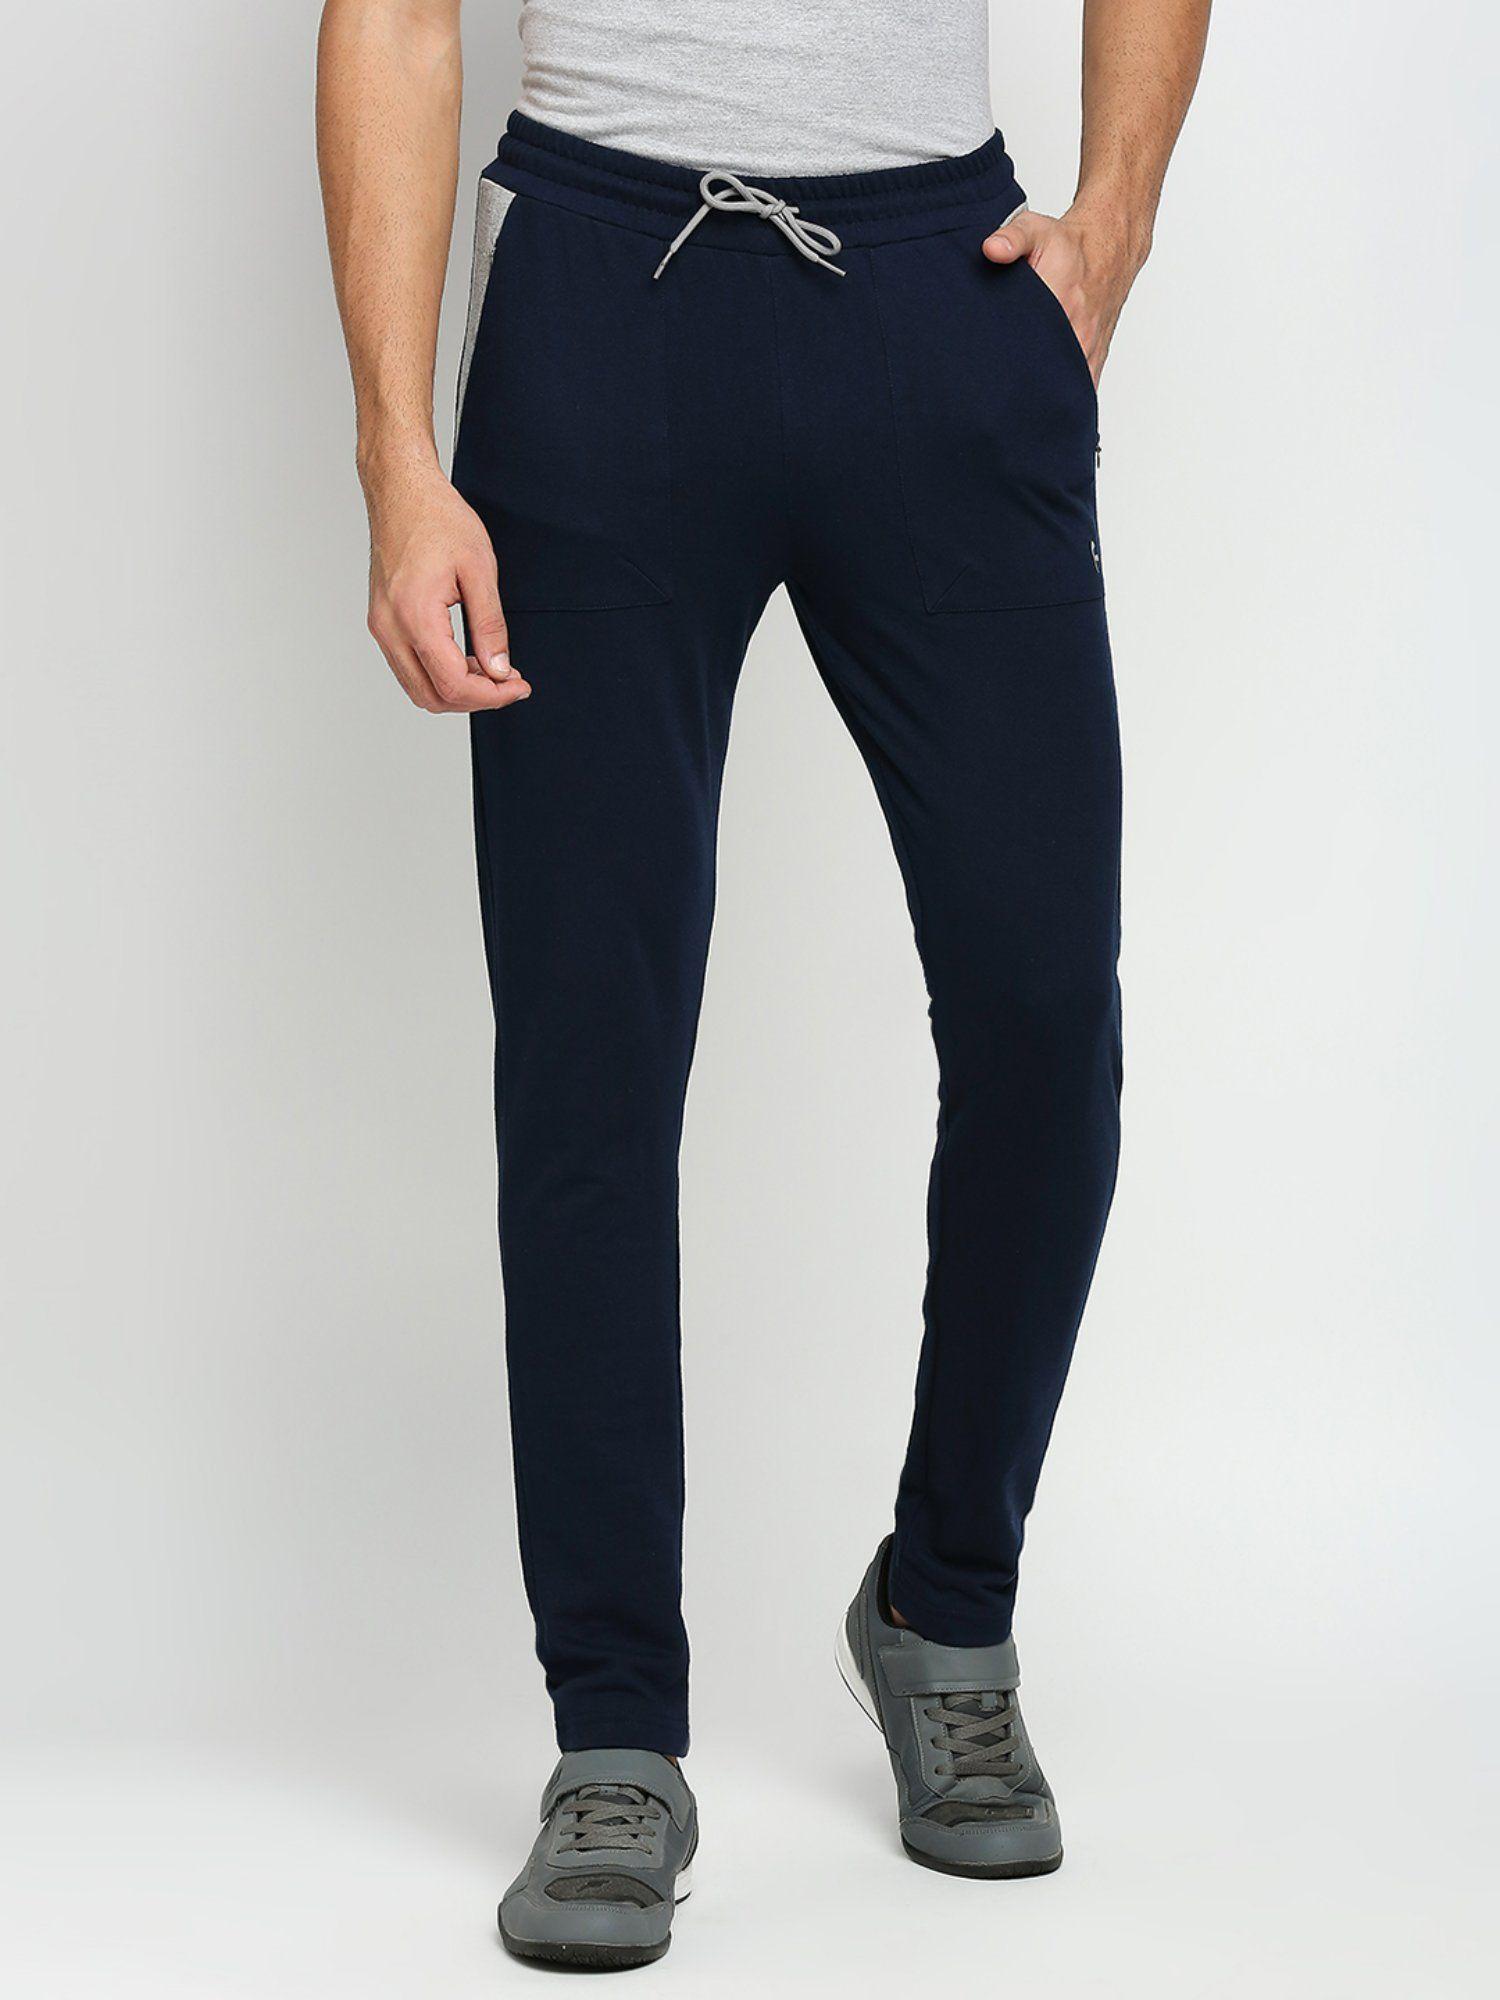 cotton polyester slim fit french terry knit joggers for mens - navy blue